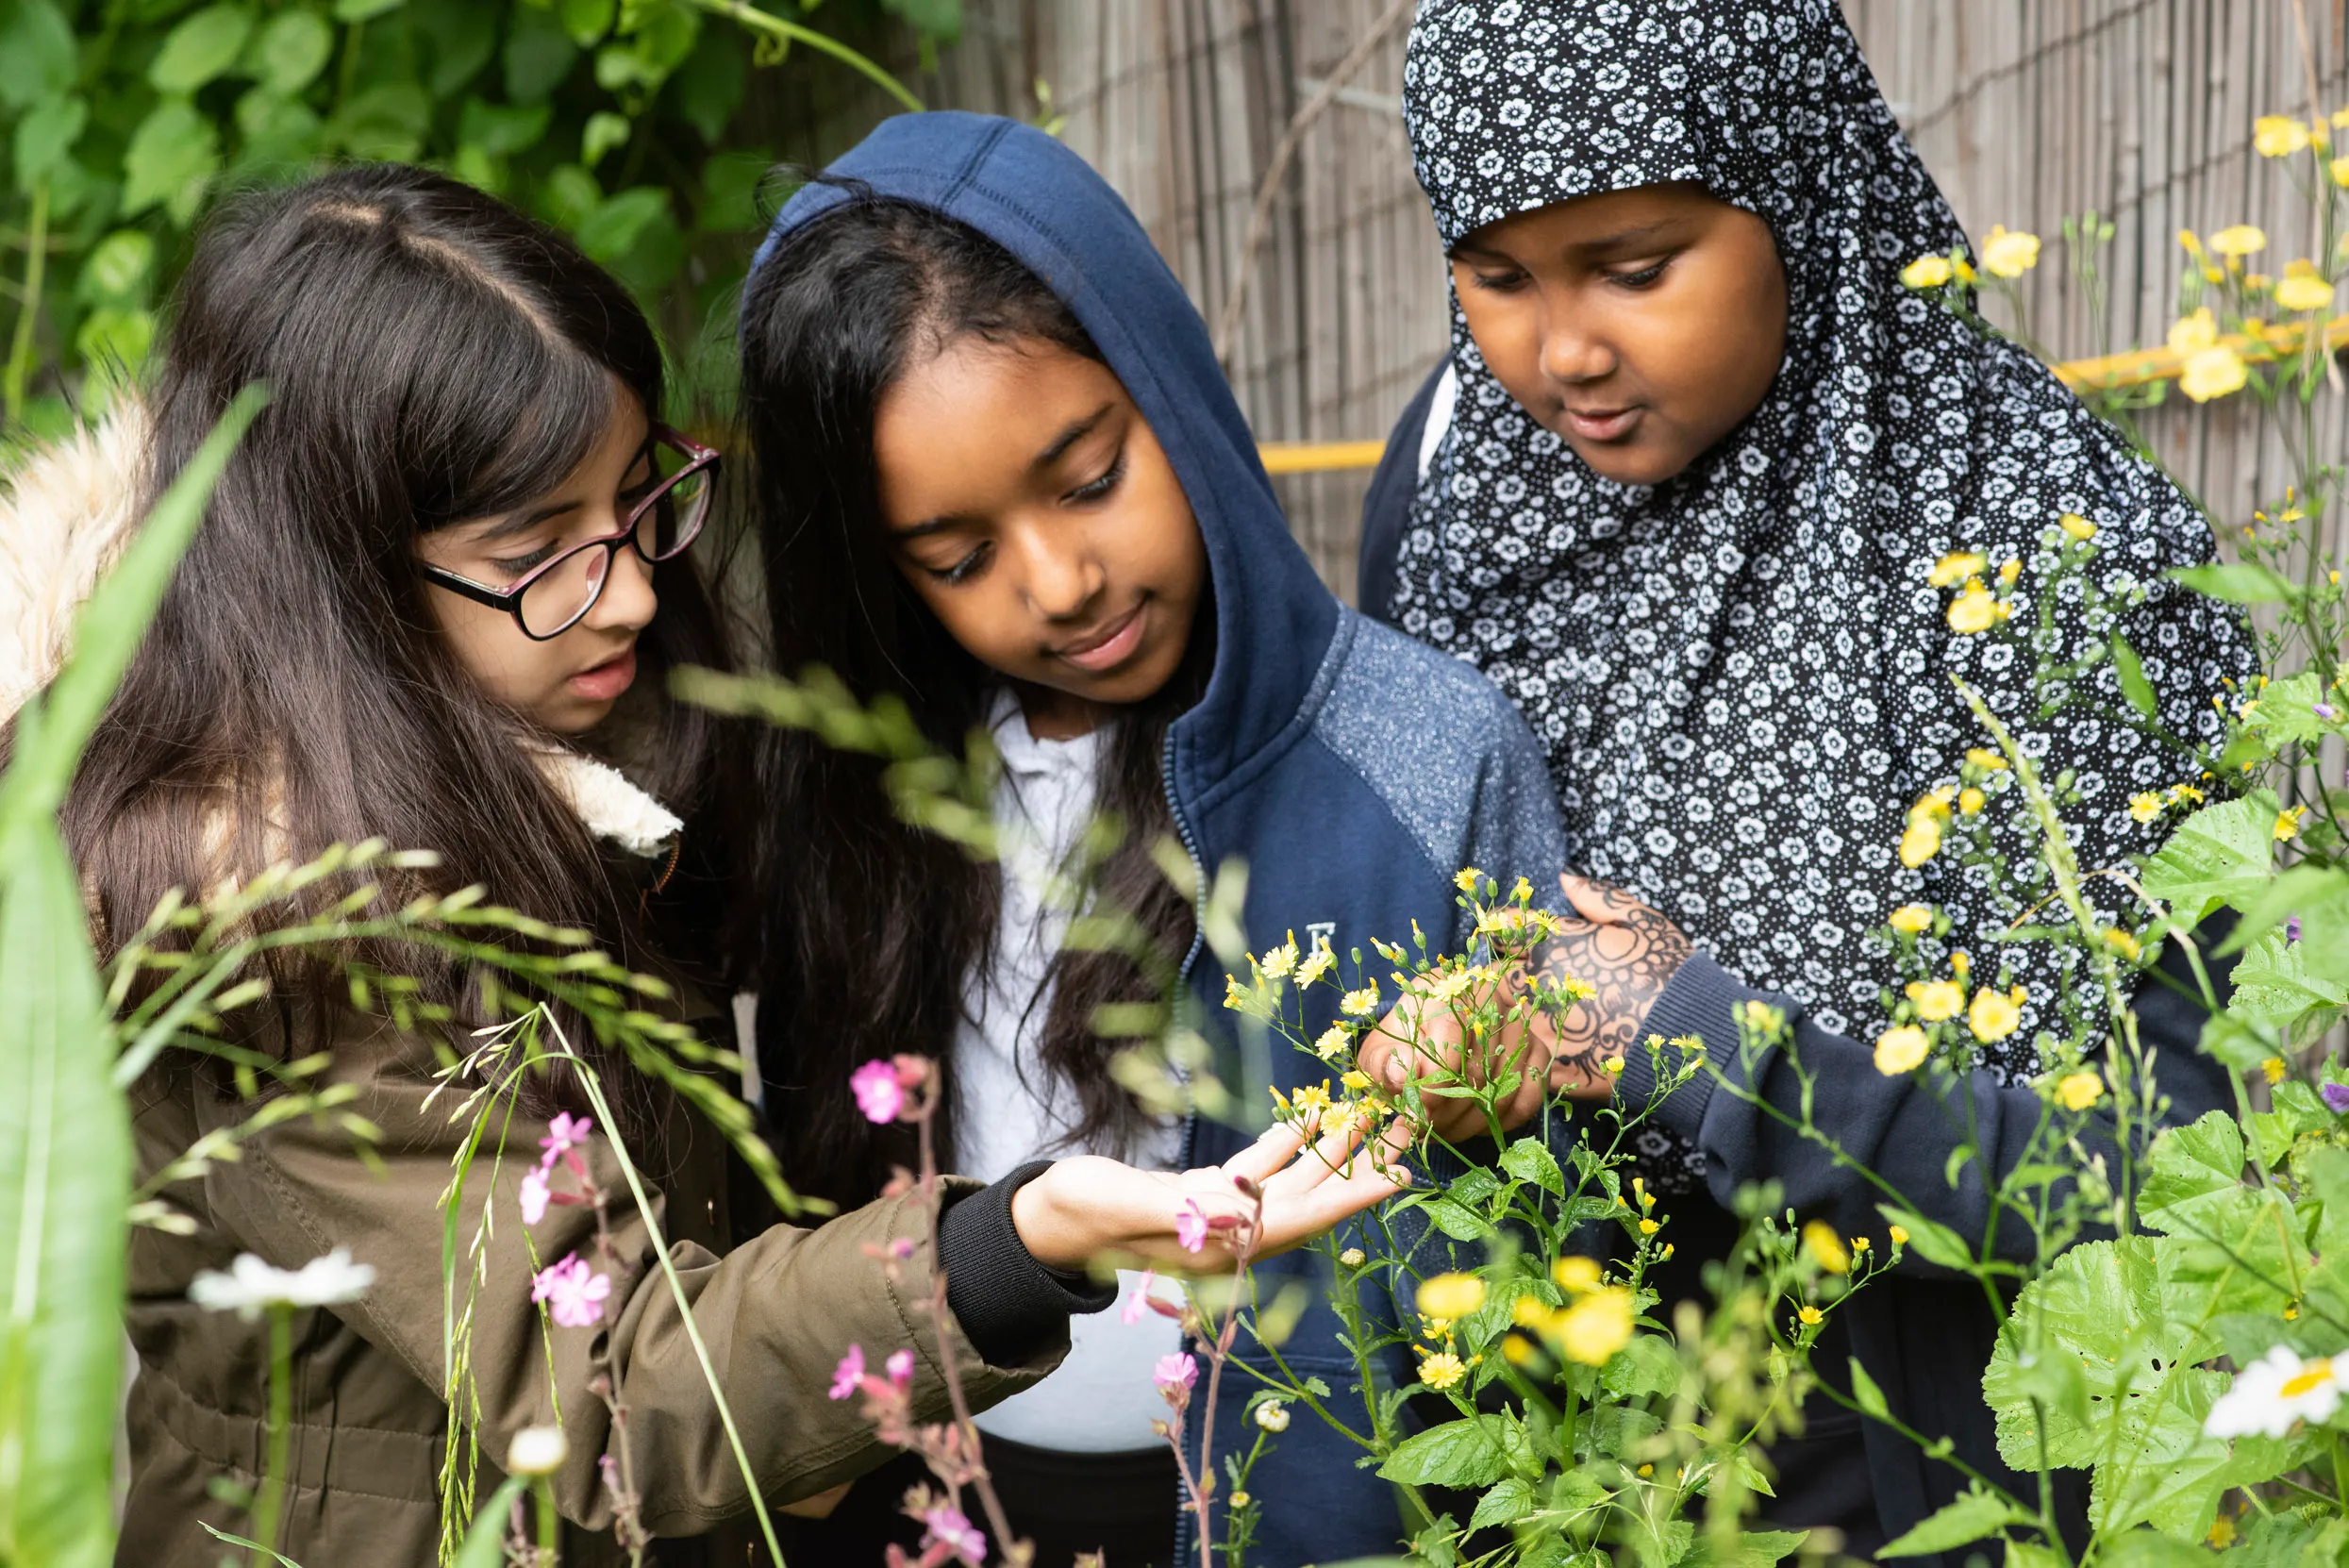 A group of school children looking at flowers growing outside.